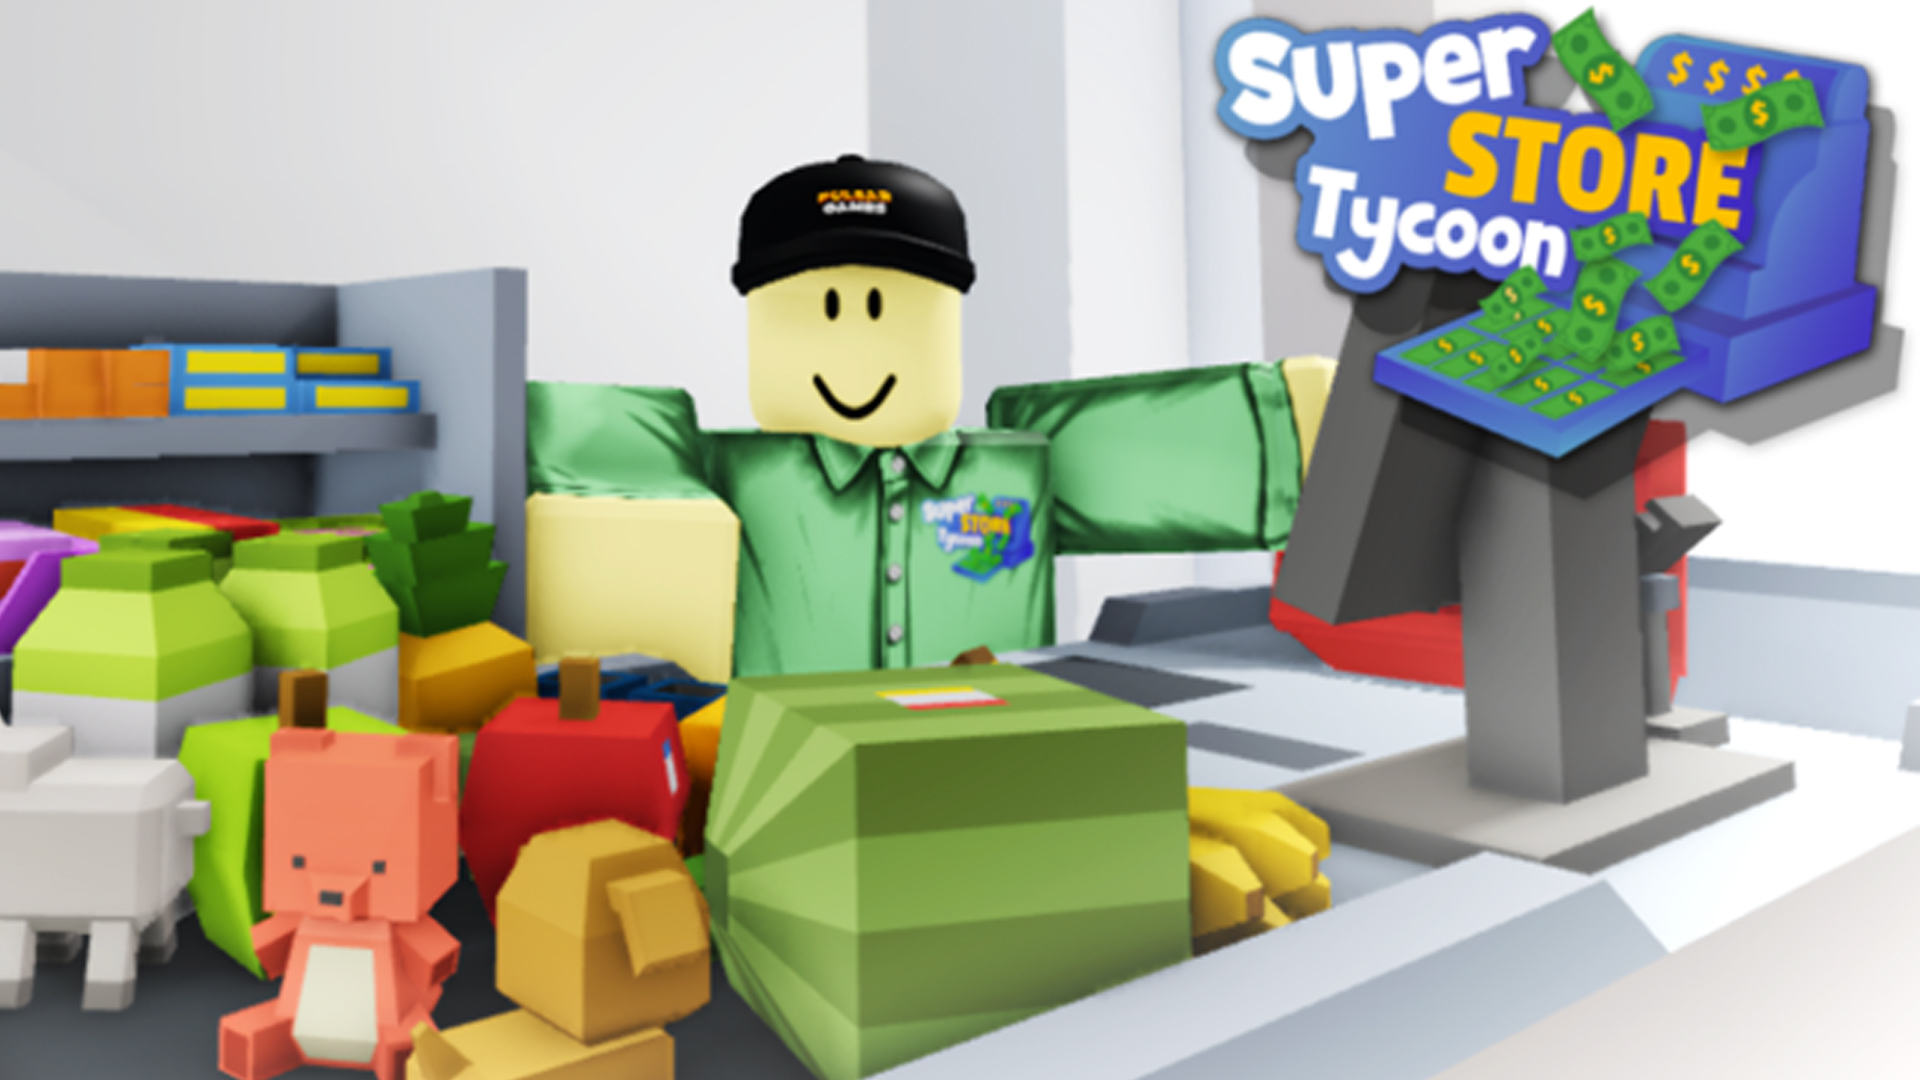 All Game Store Tycoon codes to redeem cash